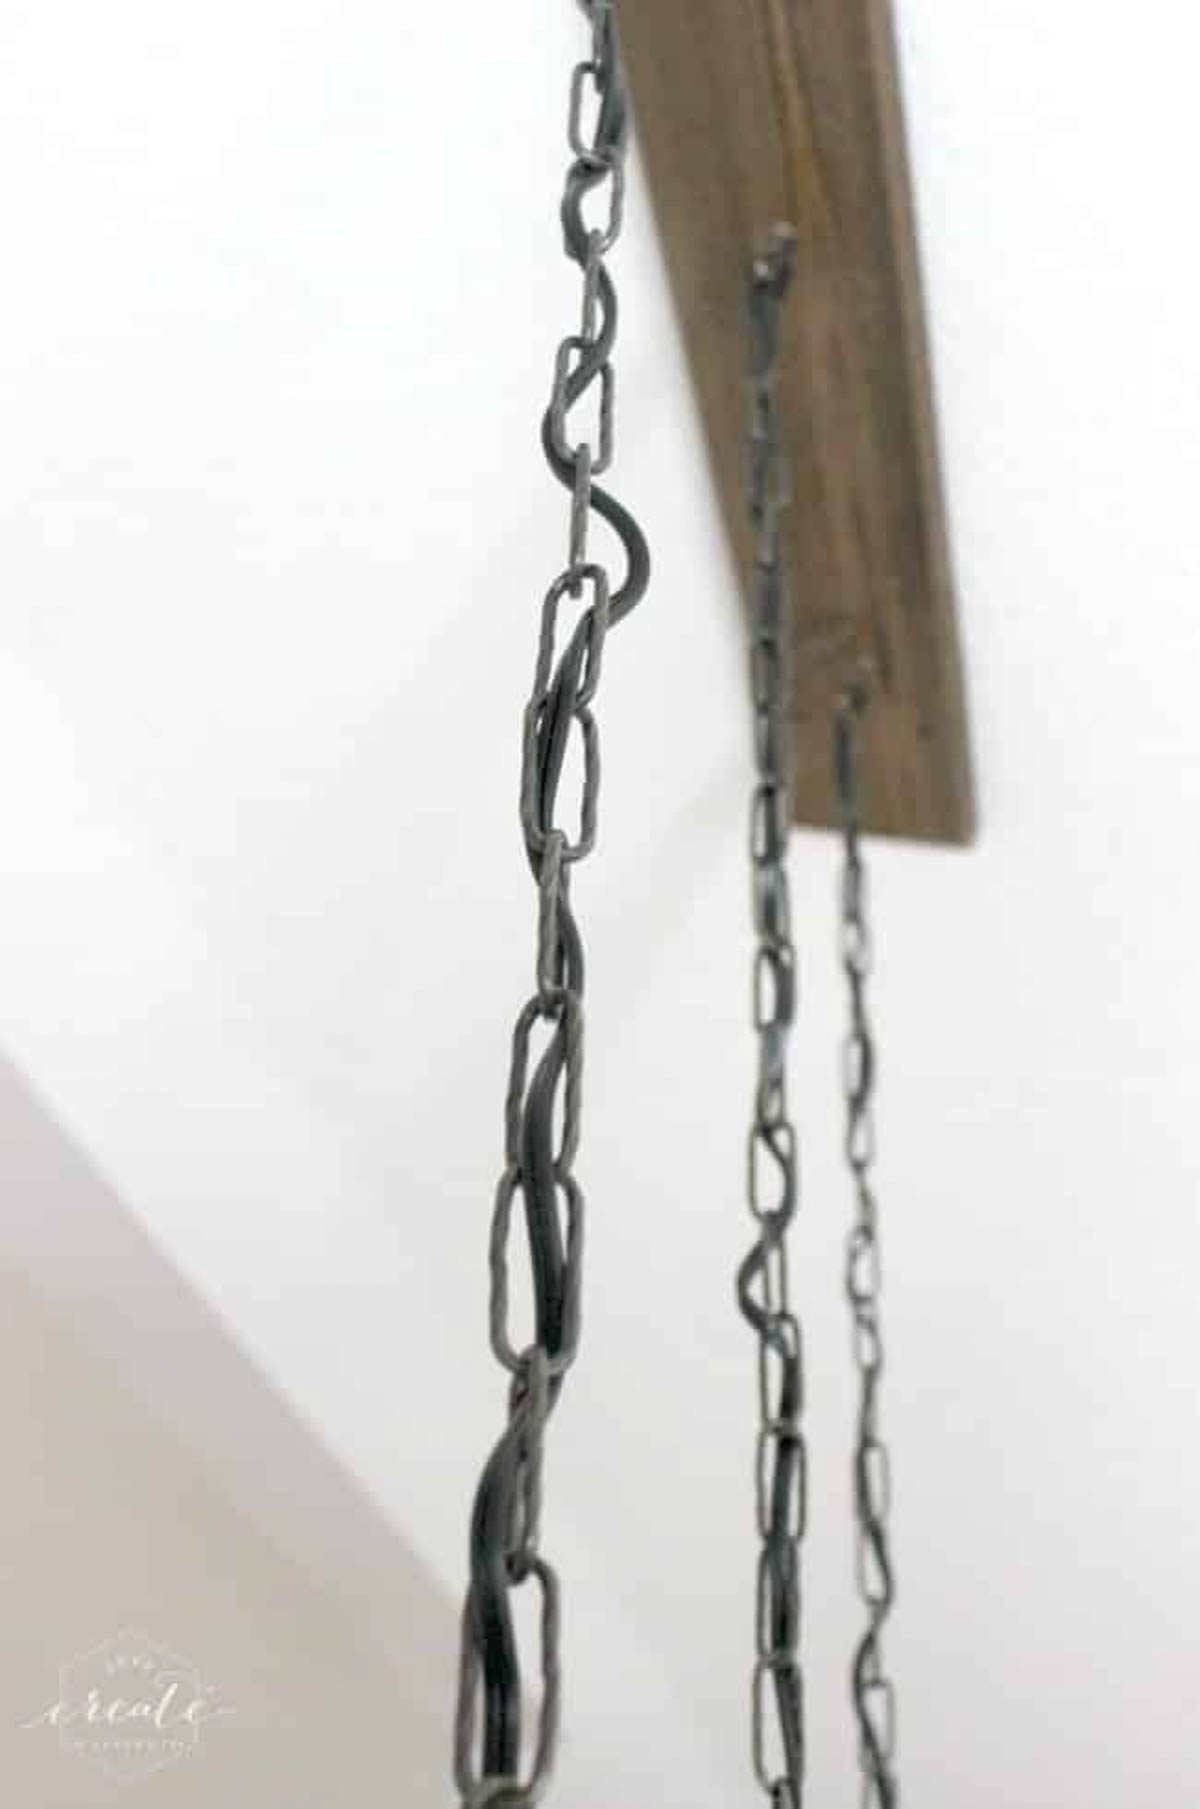 Image of chain holding the industrial pendant light